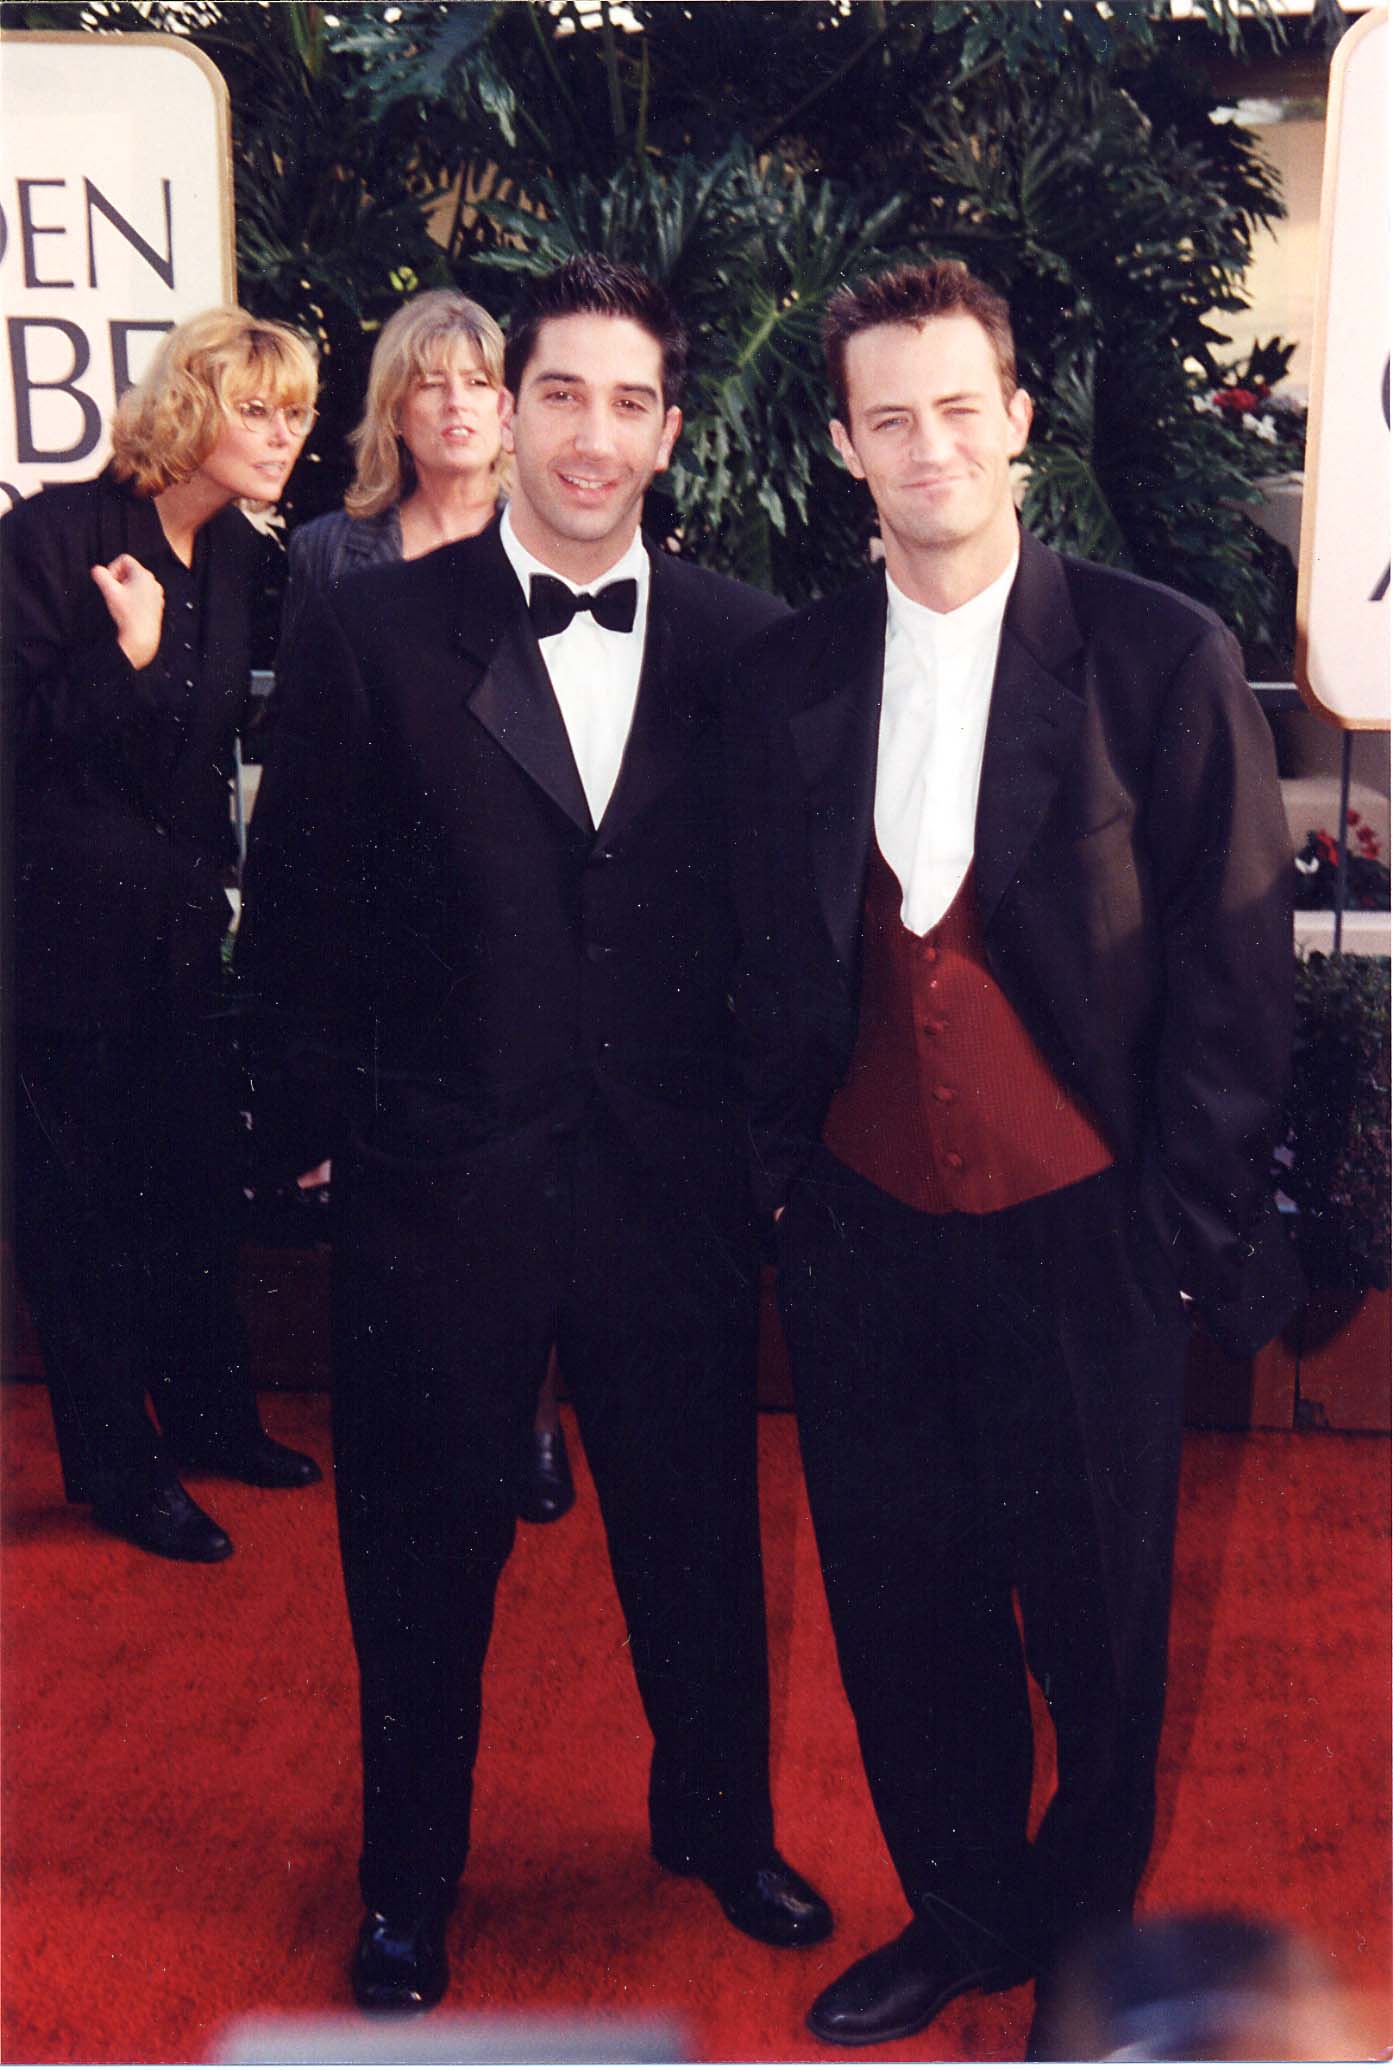 David Schwimmer and Matthew Perry at the Golden Globe Awards in Los Angeles, California in 1997 | Source: Getty Images